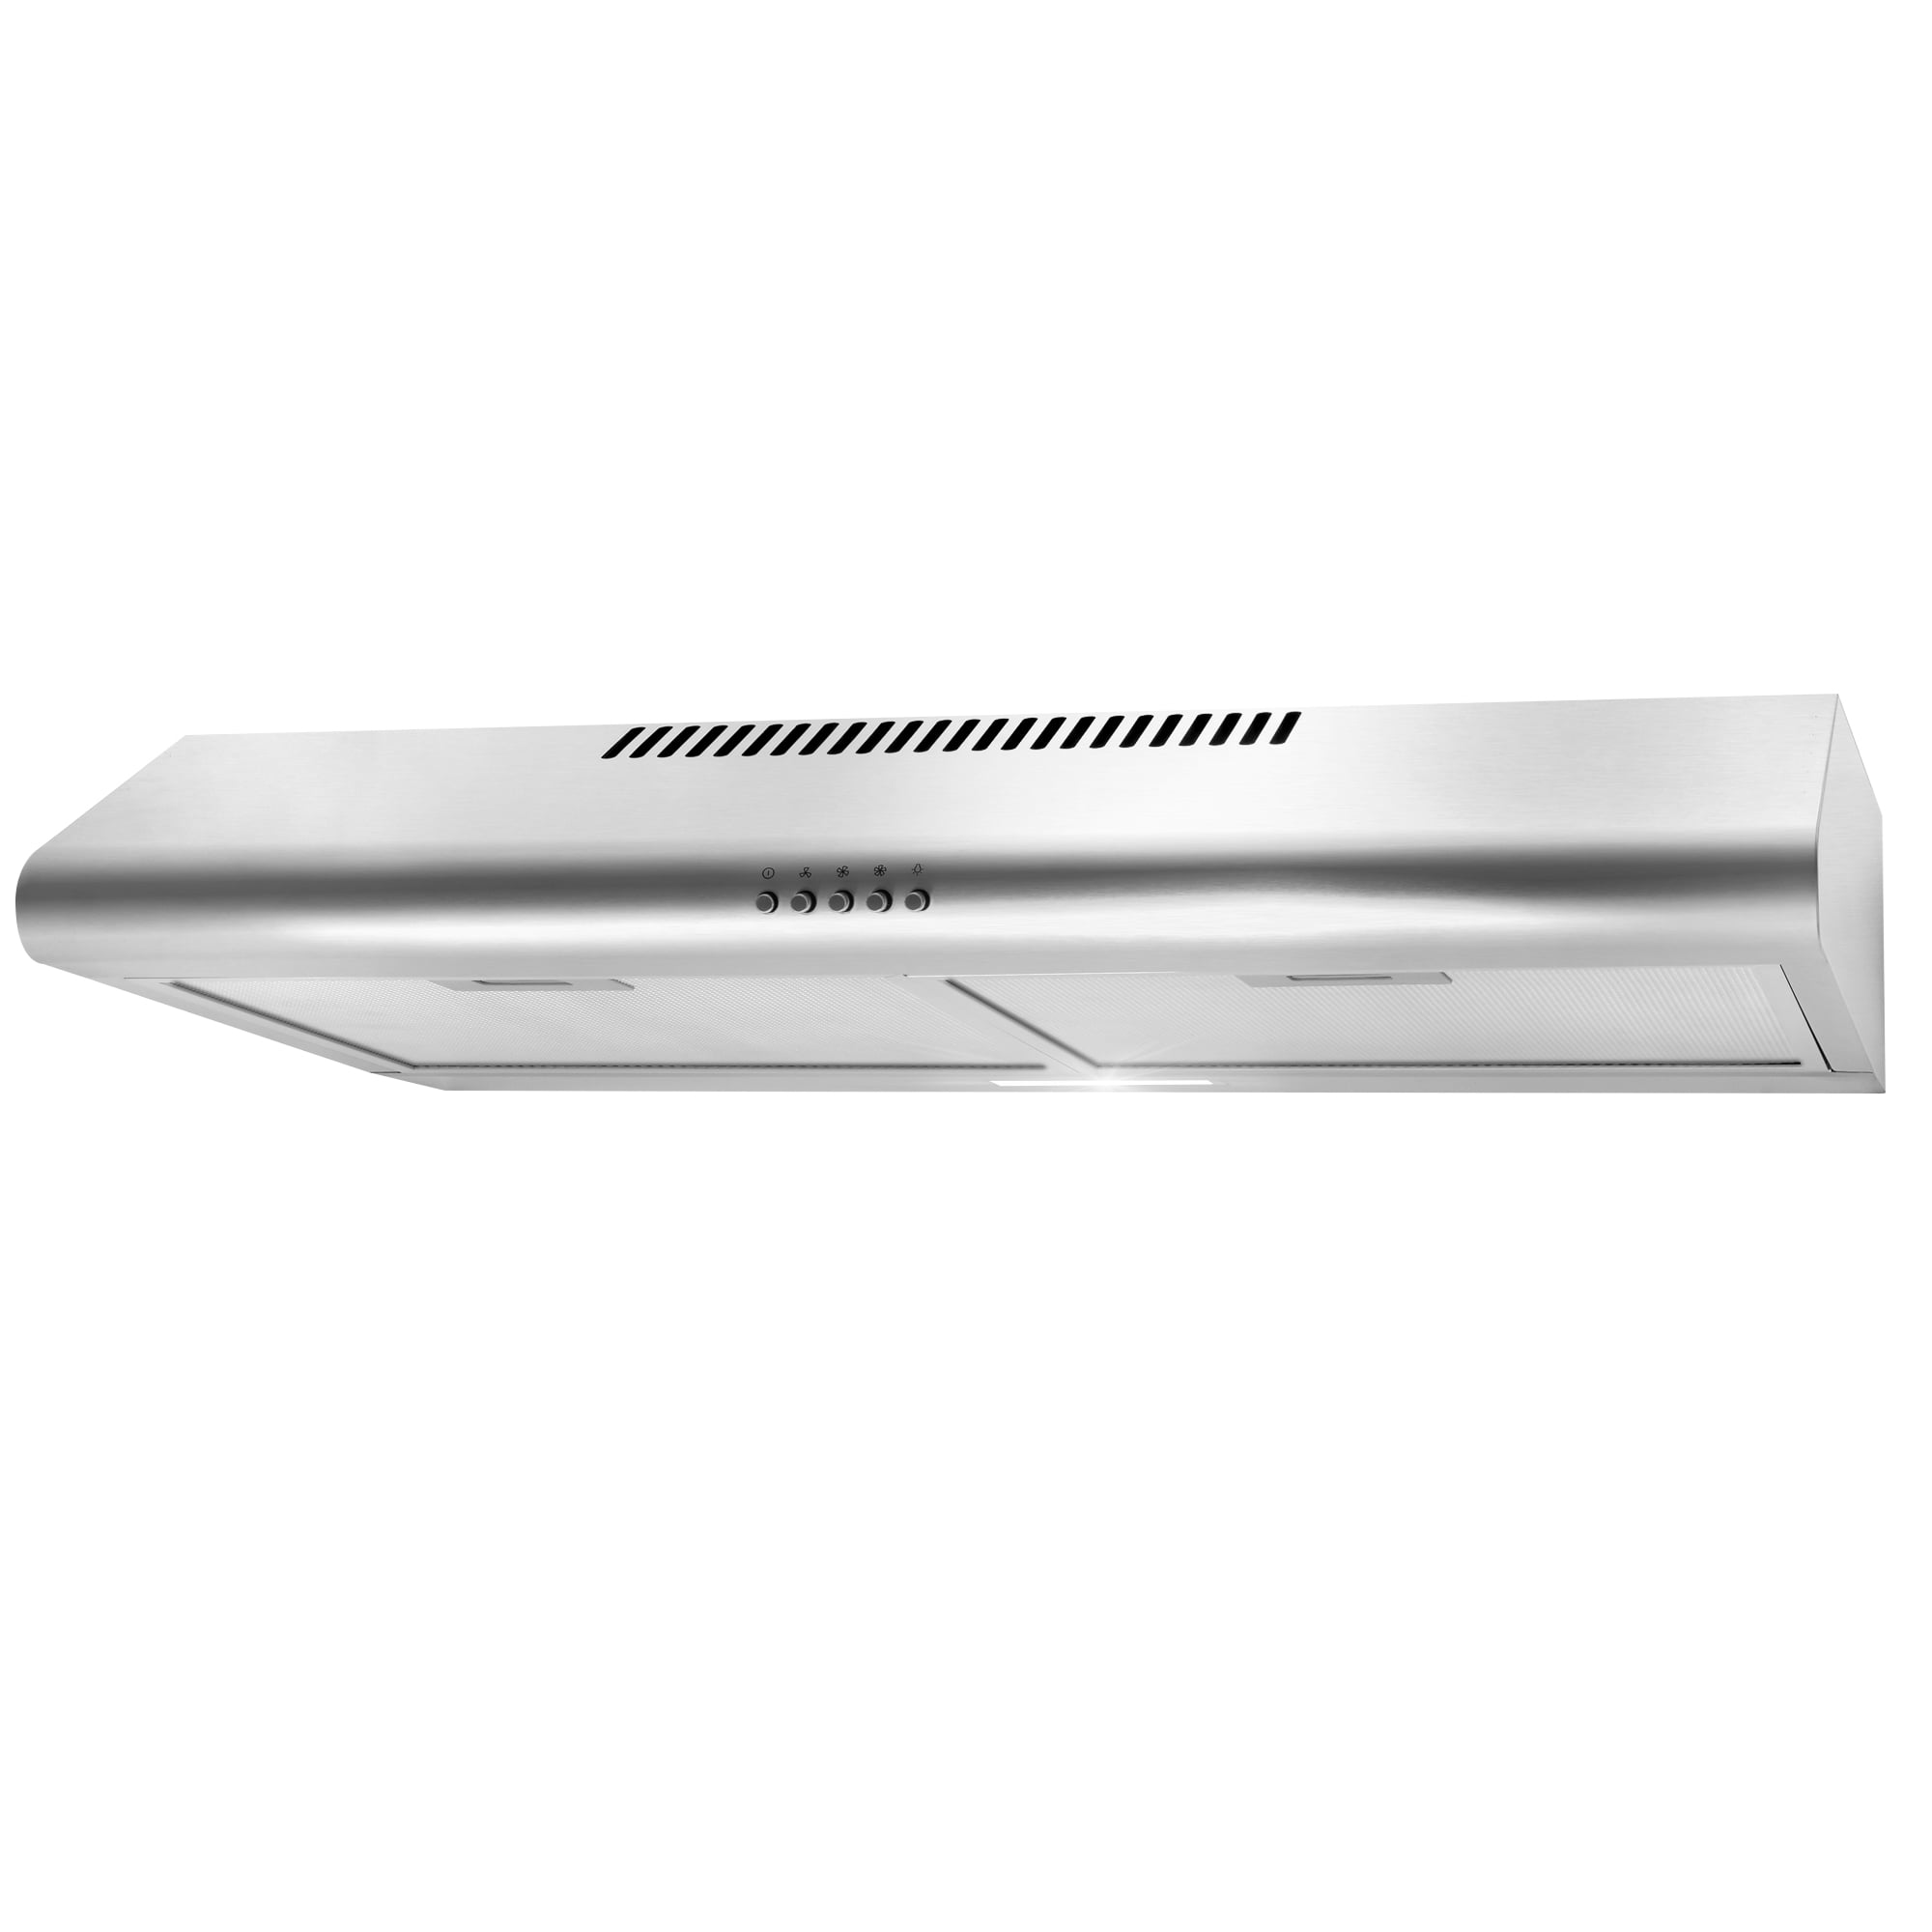  COSMO 5U30 30 in. Under Cabinet Range Hood with Ducted